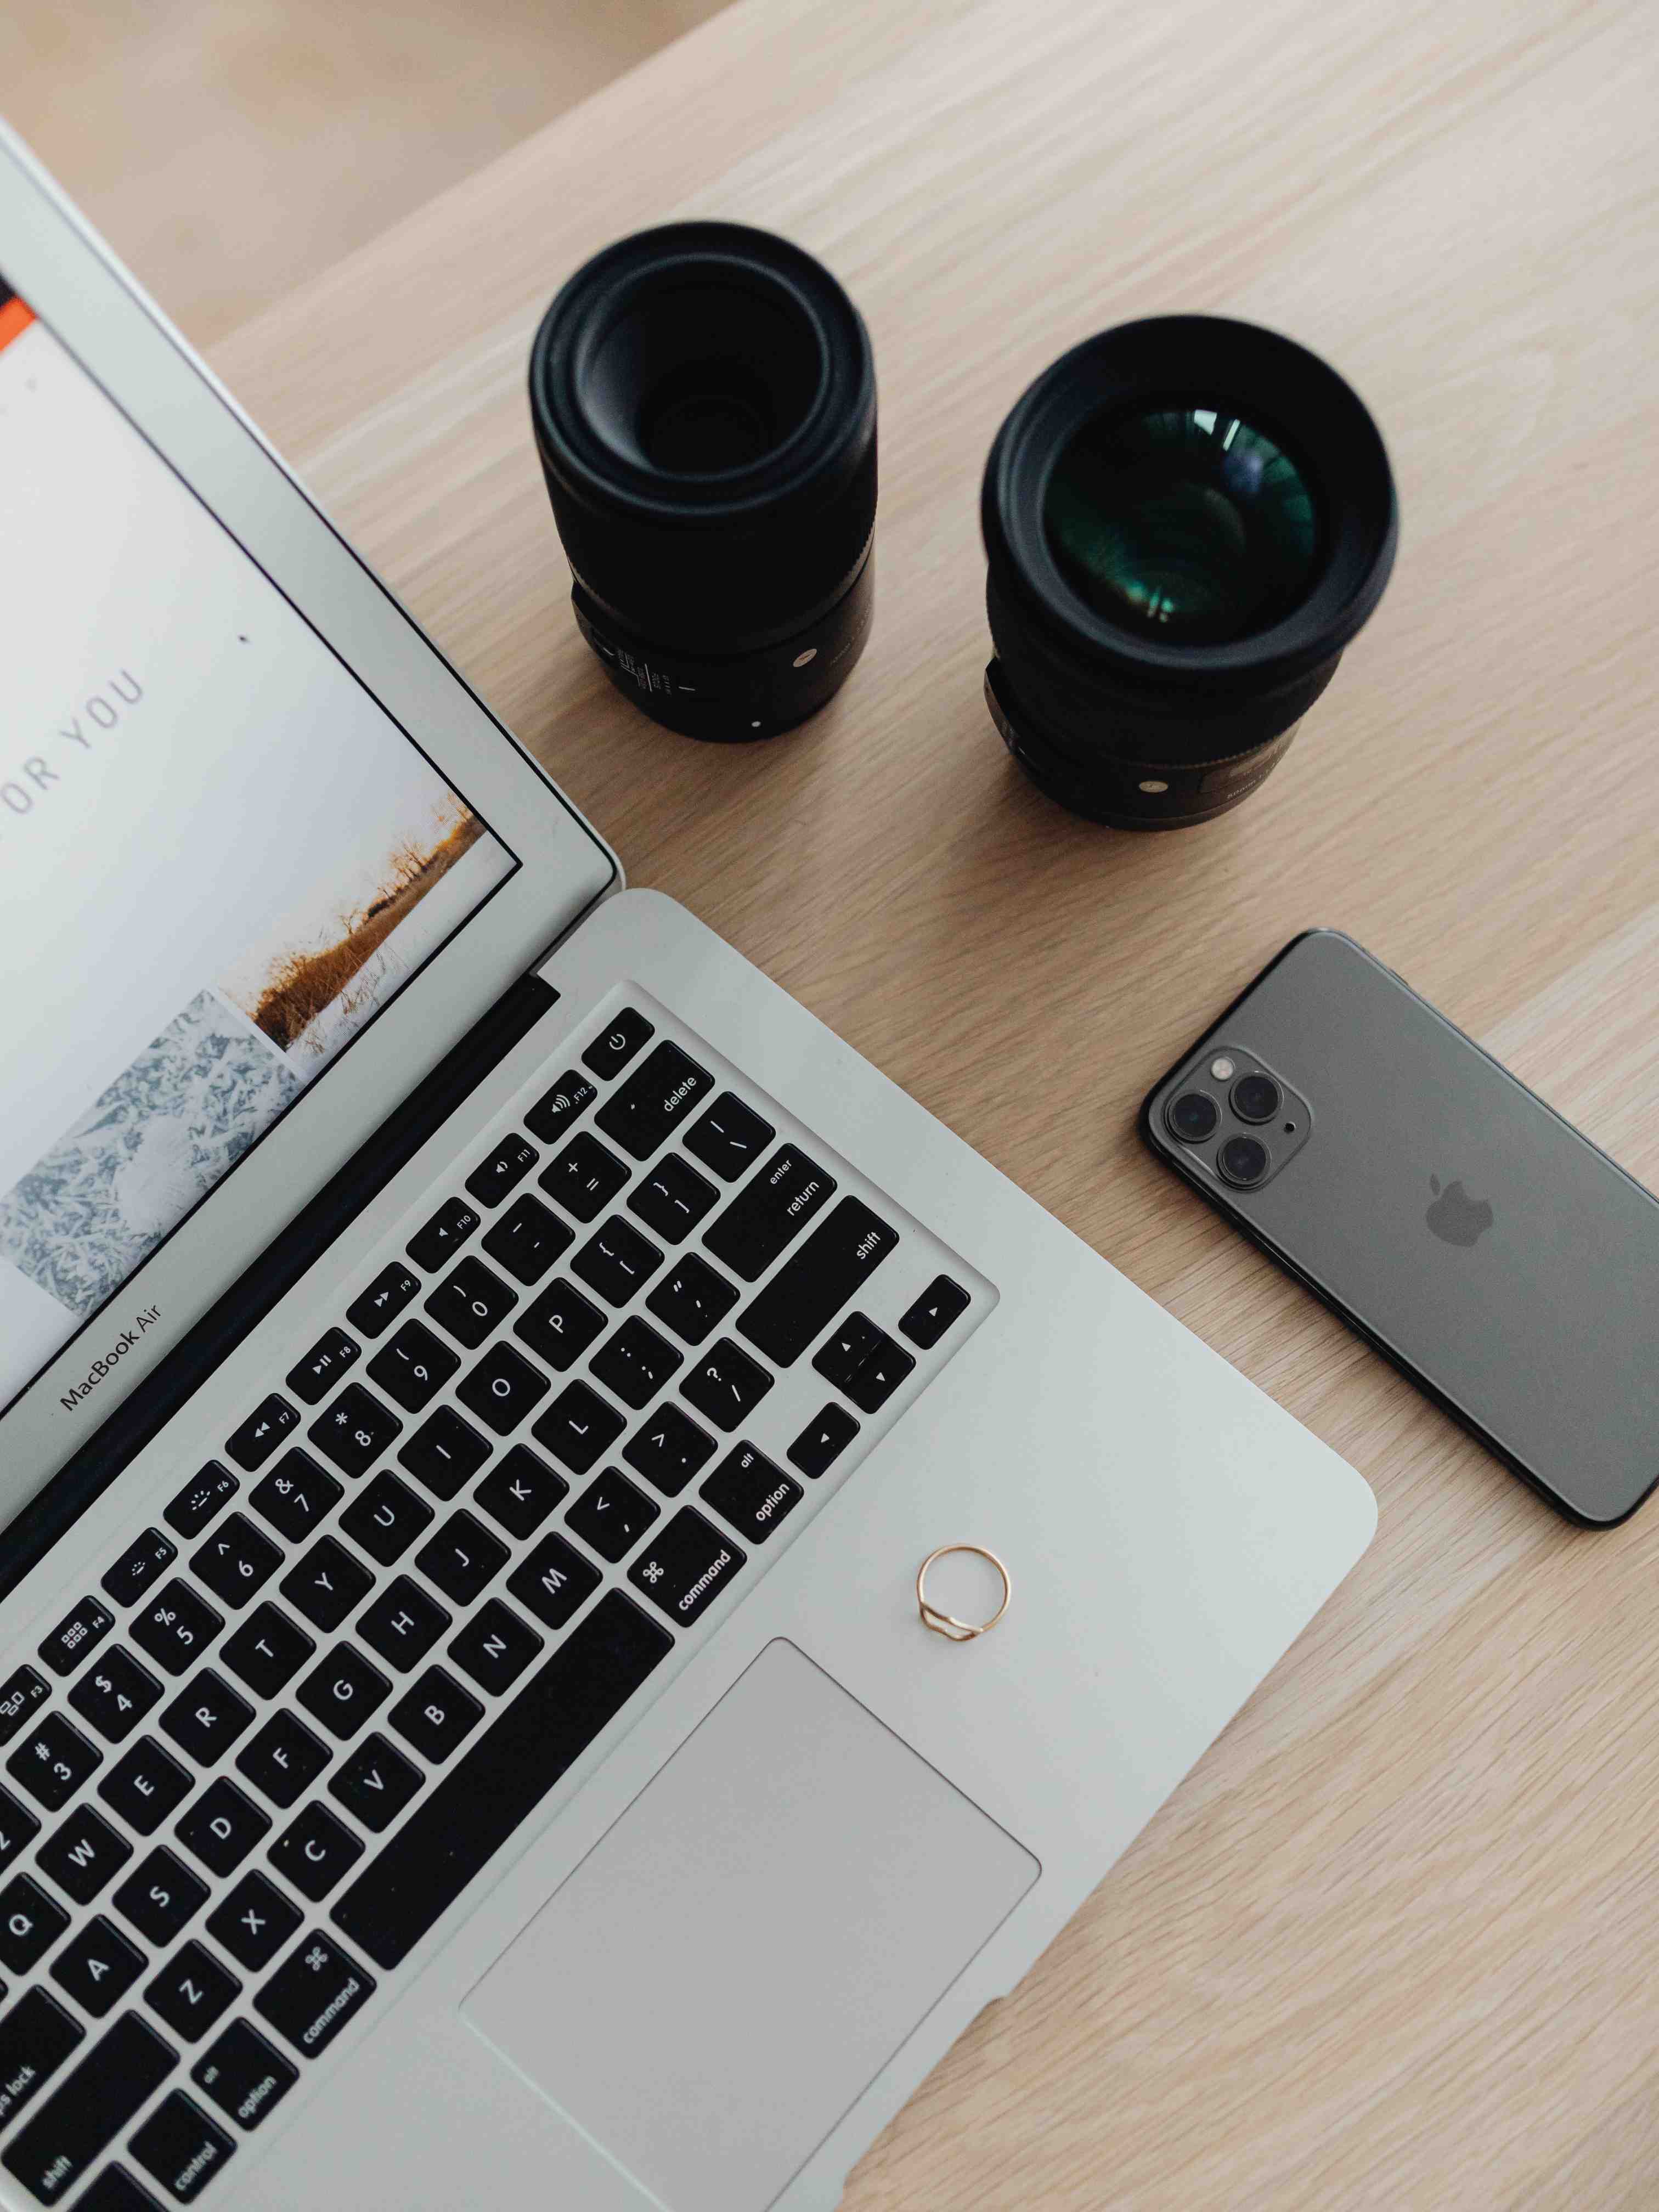 Picture-Perfect Blogging: 8 Easy Photo Tips to Try